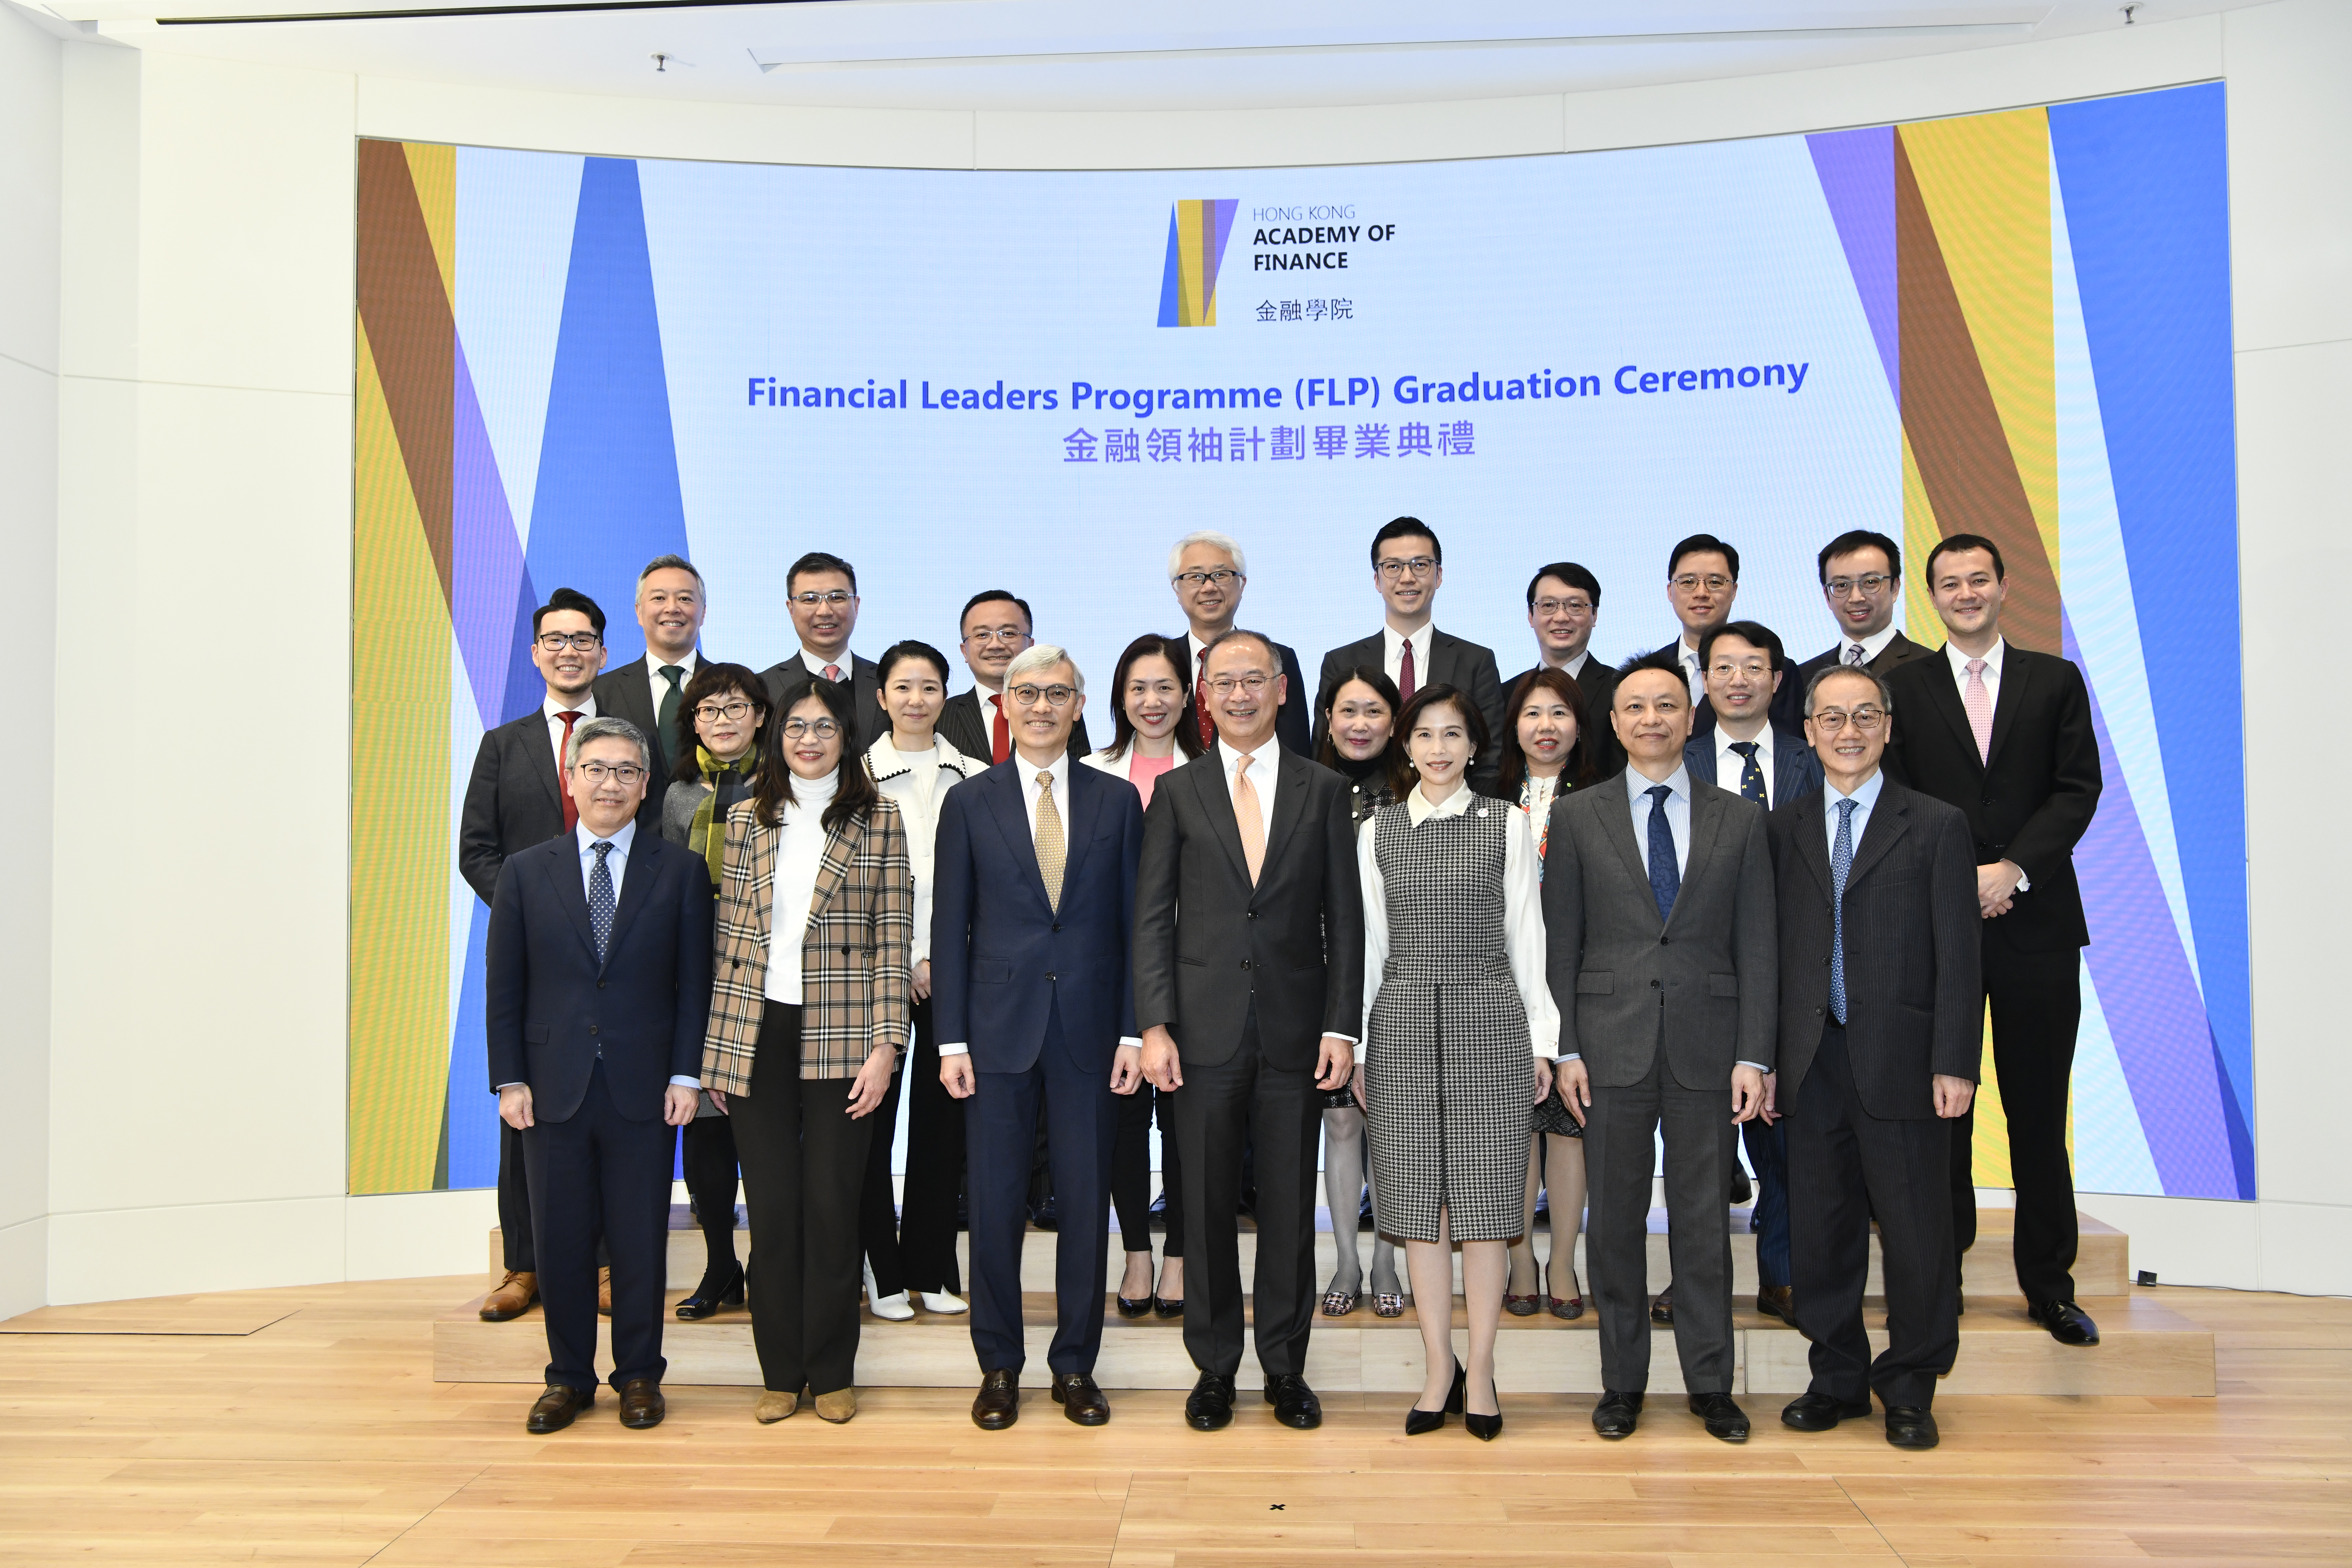 Members of the Board of Directors of the Hong Kong Academy of Finance (AoF) Mr Arthur Yuen, Ms Julia Leung, Mr Stephen Yiu, Mr Eddie Yue, Mrs Ayesha Macpherson Lau, Mr Darryl Chan and Chief Executive Officer of the AoF Mr KC Kwok (front row from the left) attend the Financial Leaders Programme (FLP) Graduation Ceremony today (14 December) with FLP Graduates (2<sup>nd</sup> and 3<sup>rd</sup> rows).